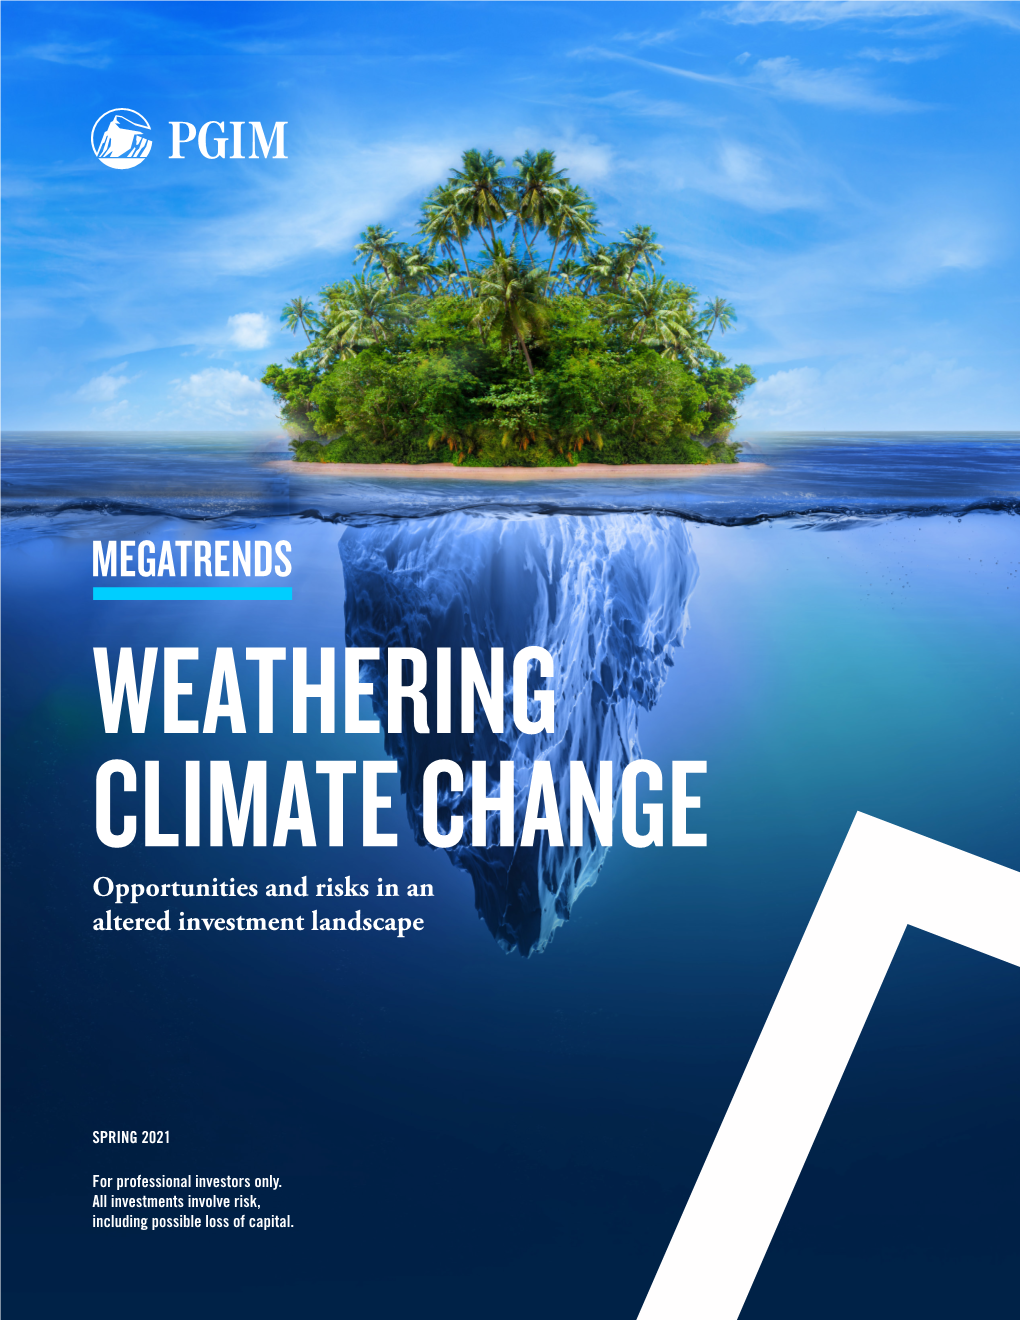 WEATHERING CLIMATE CHANGE Opportunities and Risks in an Altered Investment Landscape